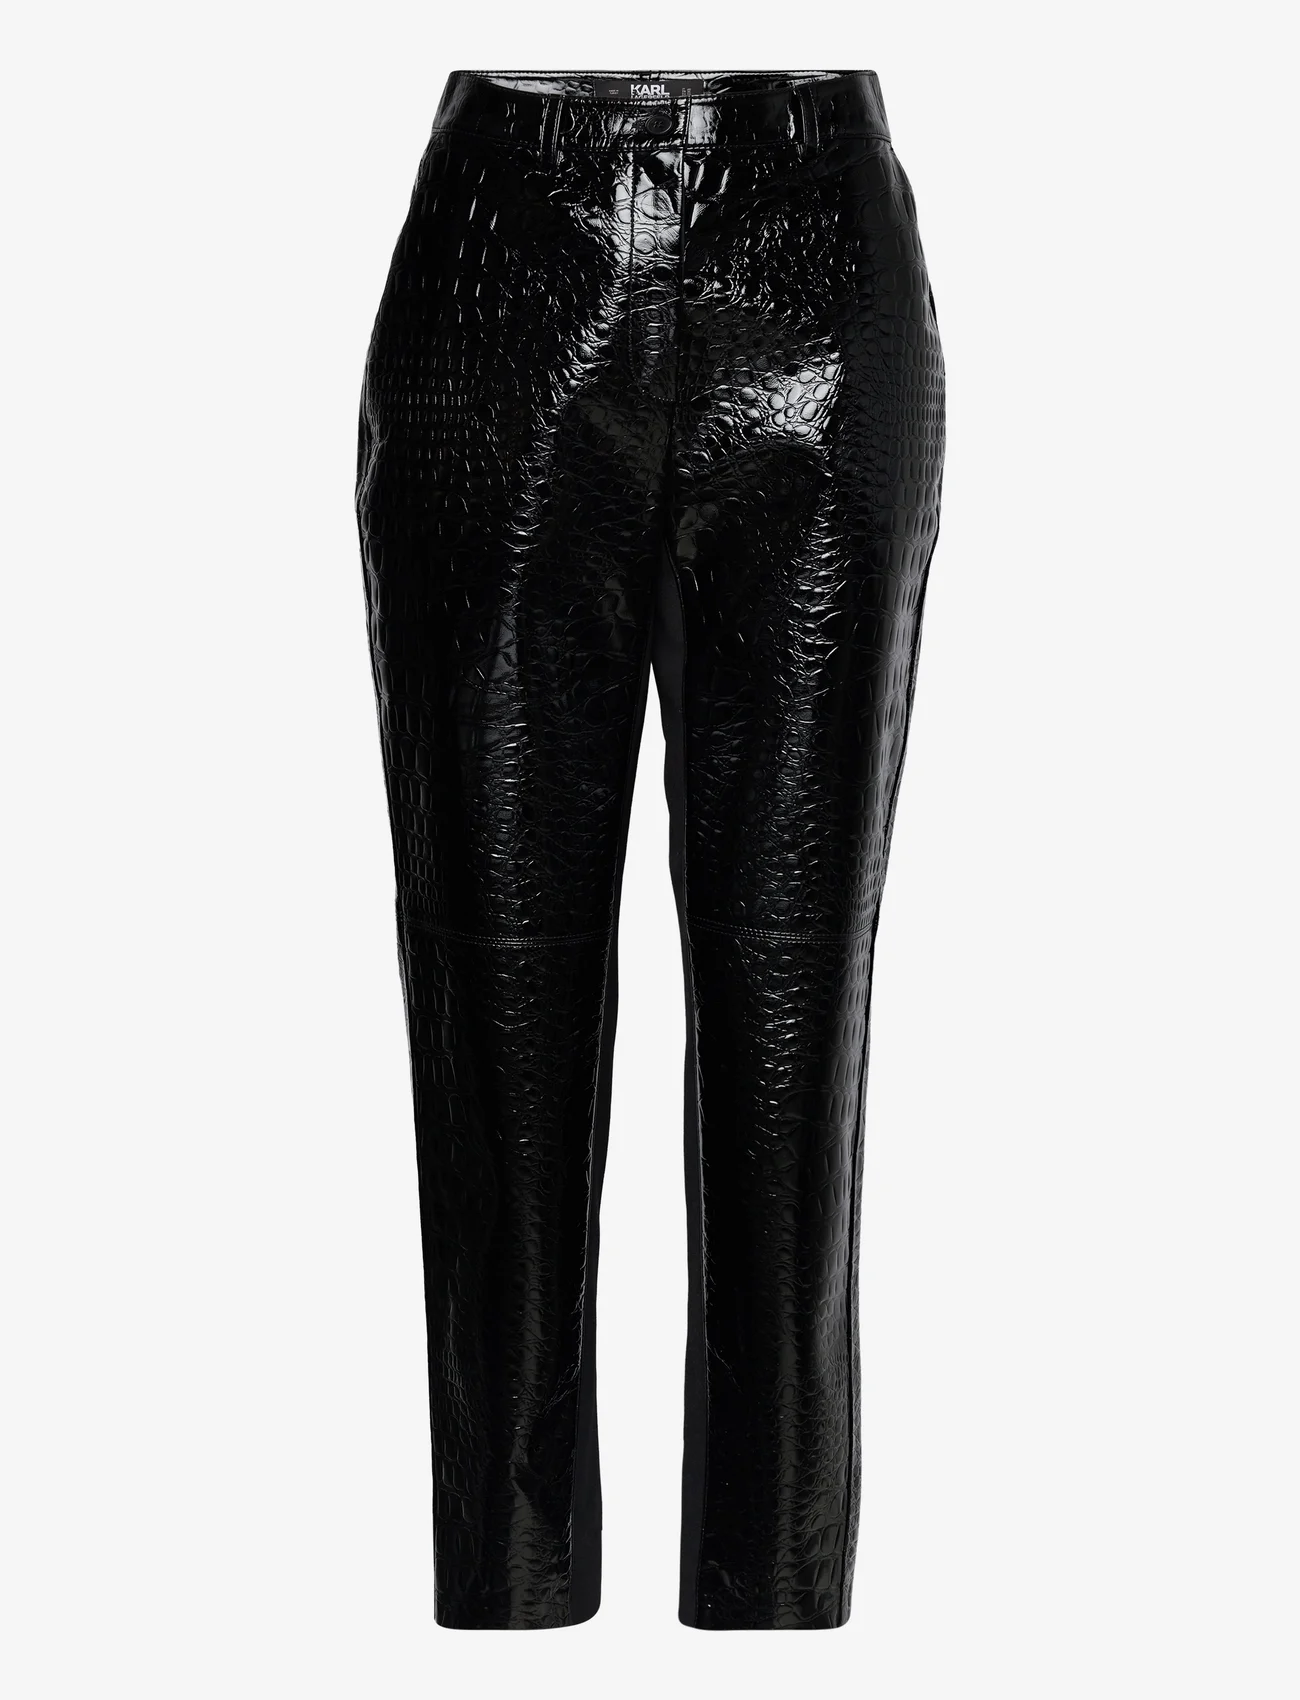 Karl Lagerfeld - faux croc patent leather pants - party wear at outlet prices - black - 0